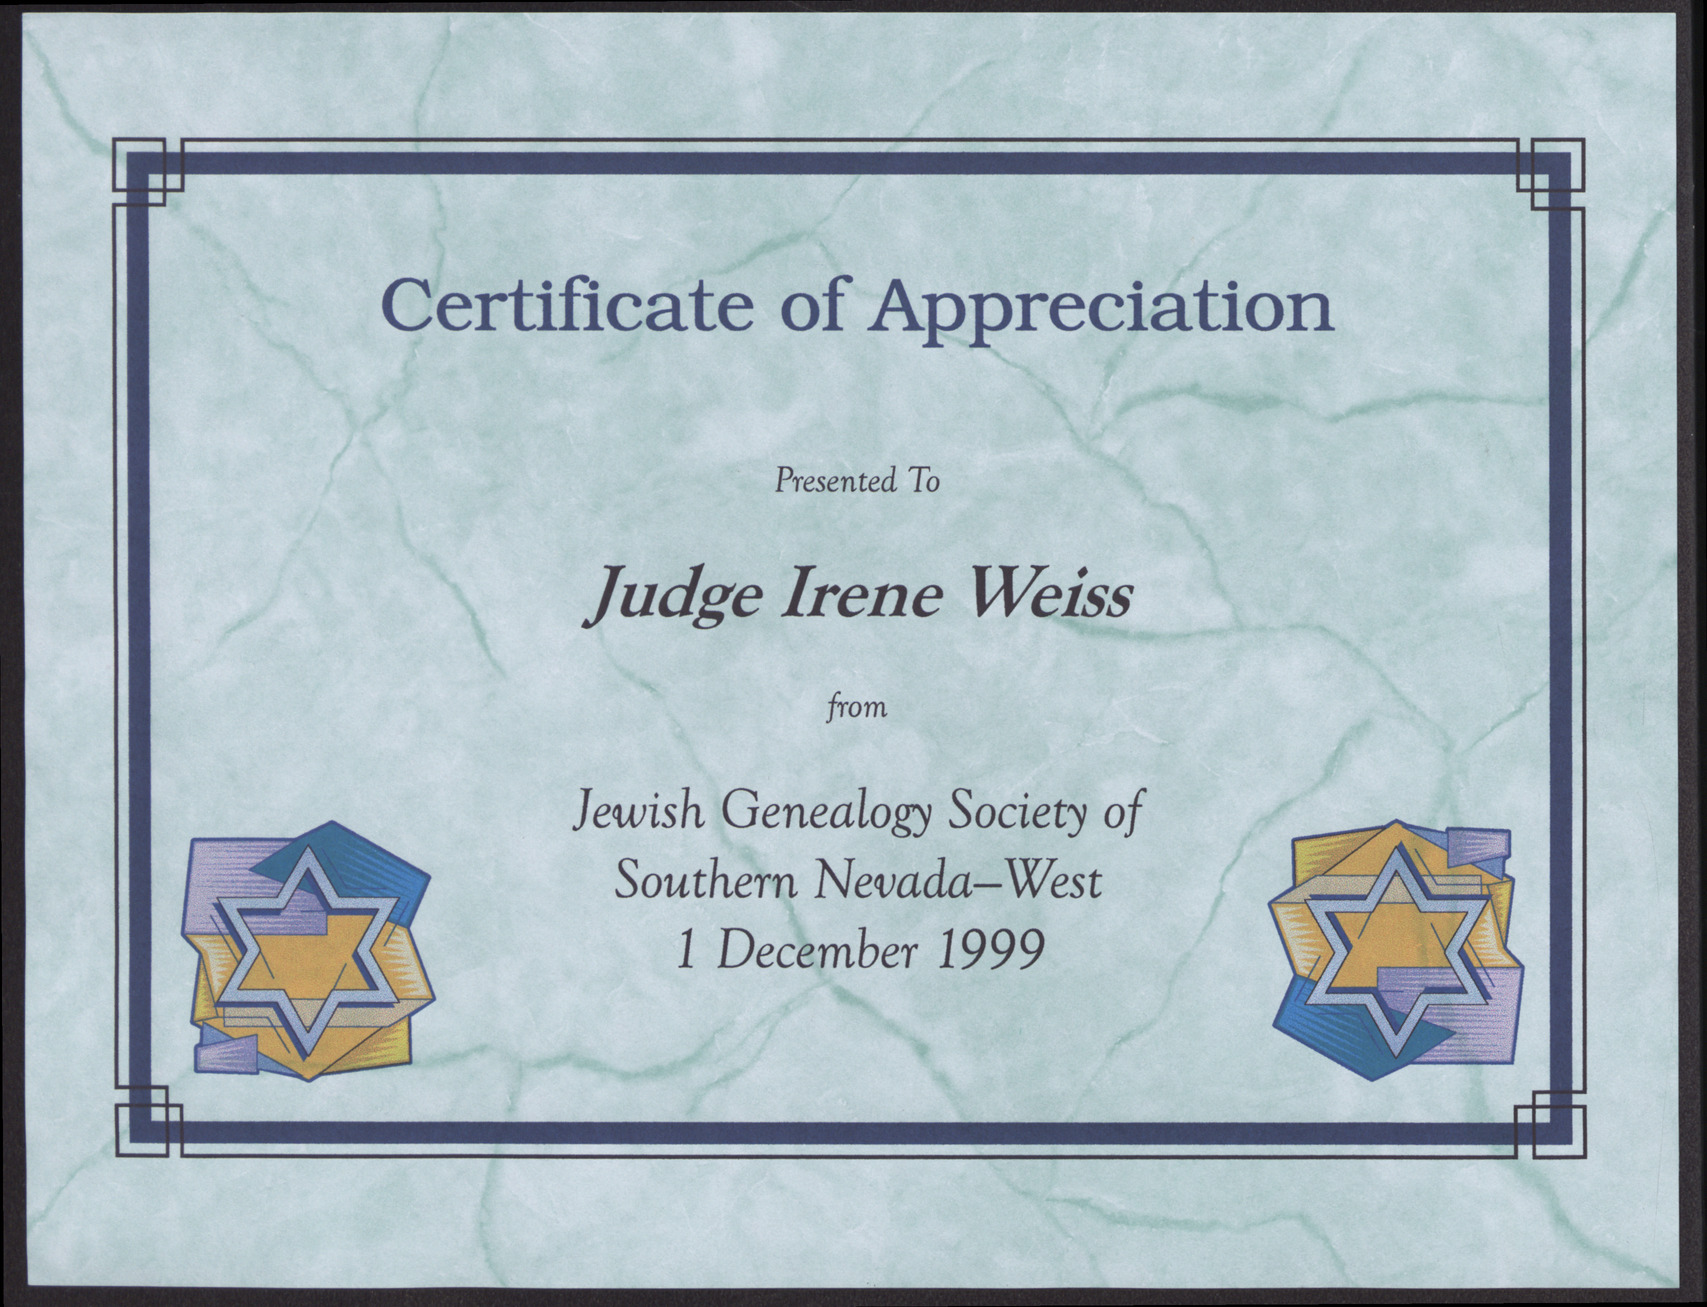 Certificate for Judge Irene Weiss from the Jewish Genealogy Society fo Southern Nevada West, December 1, 1999